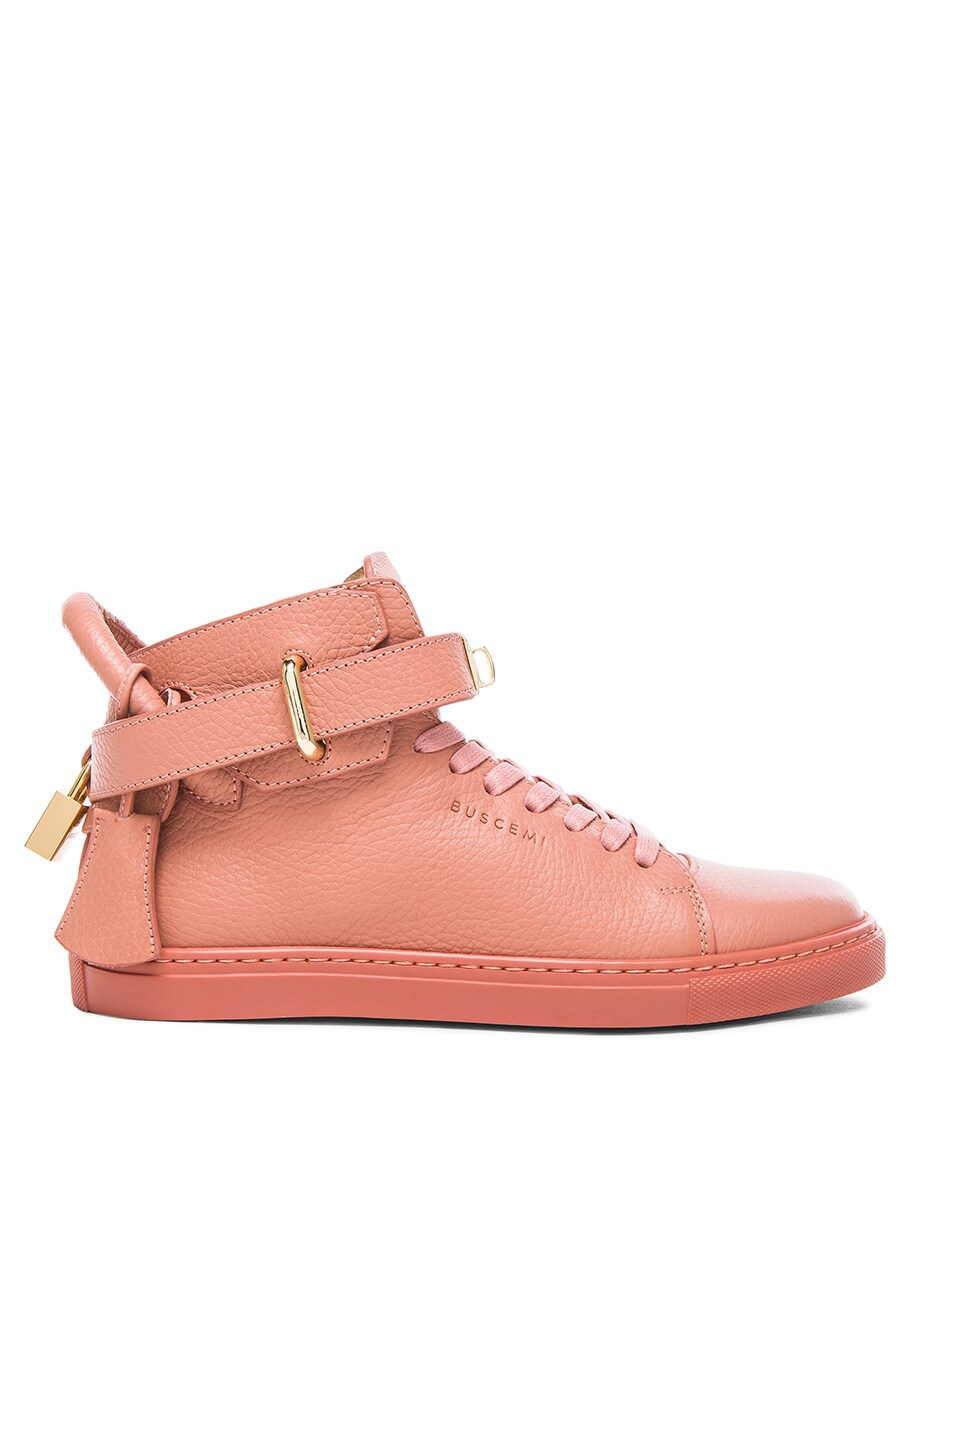 Image 1 of Buscemi 100MM Leather Sneakers in Rosa